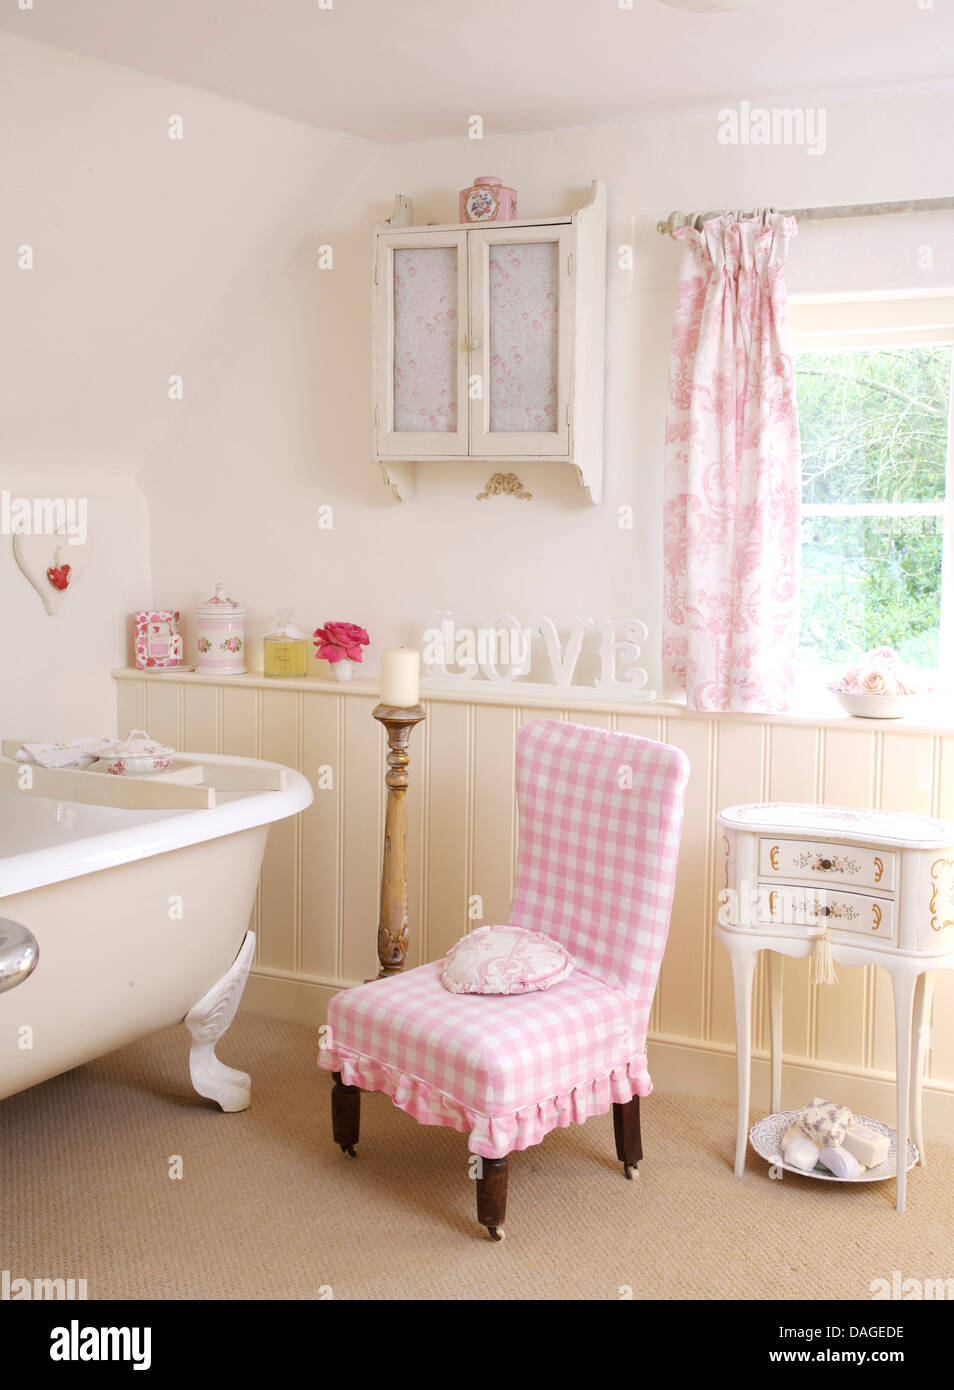 Pink checked loose cover on chair next to roll top bath in country bathroom with white wall cabinet and pink curtains Stock Photo